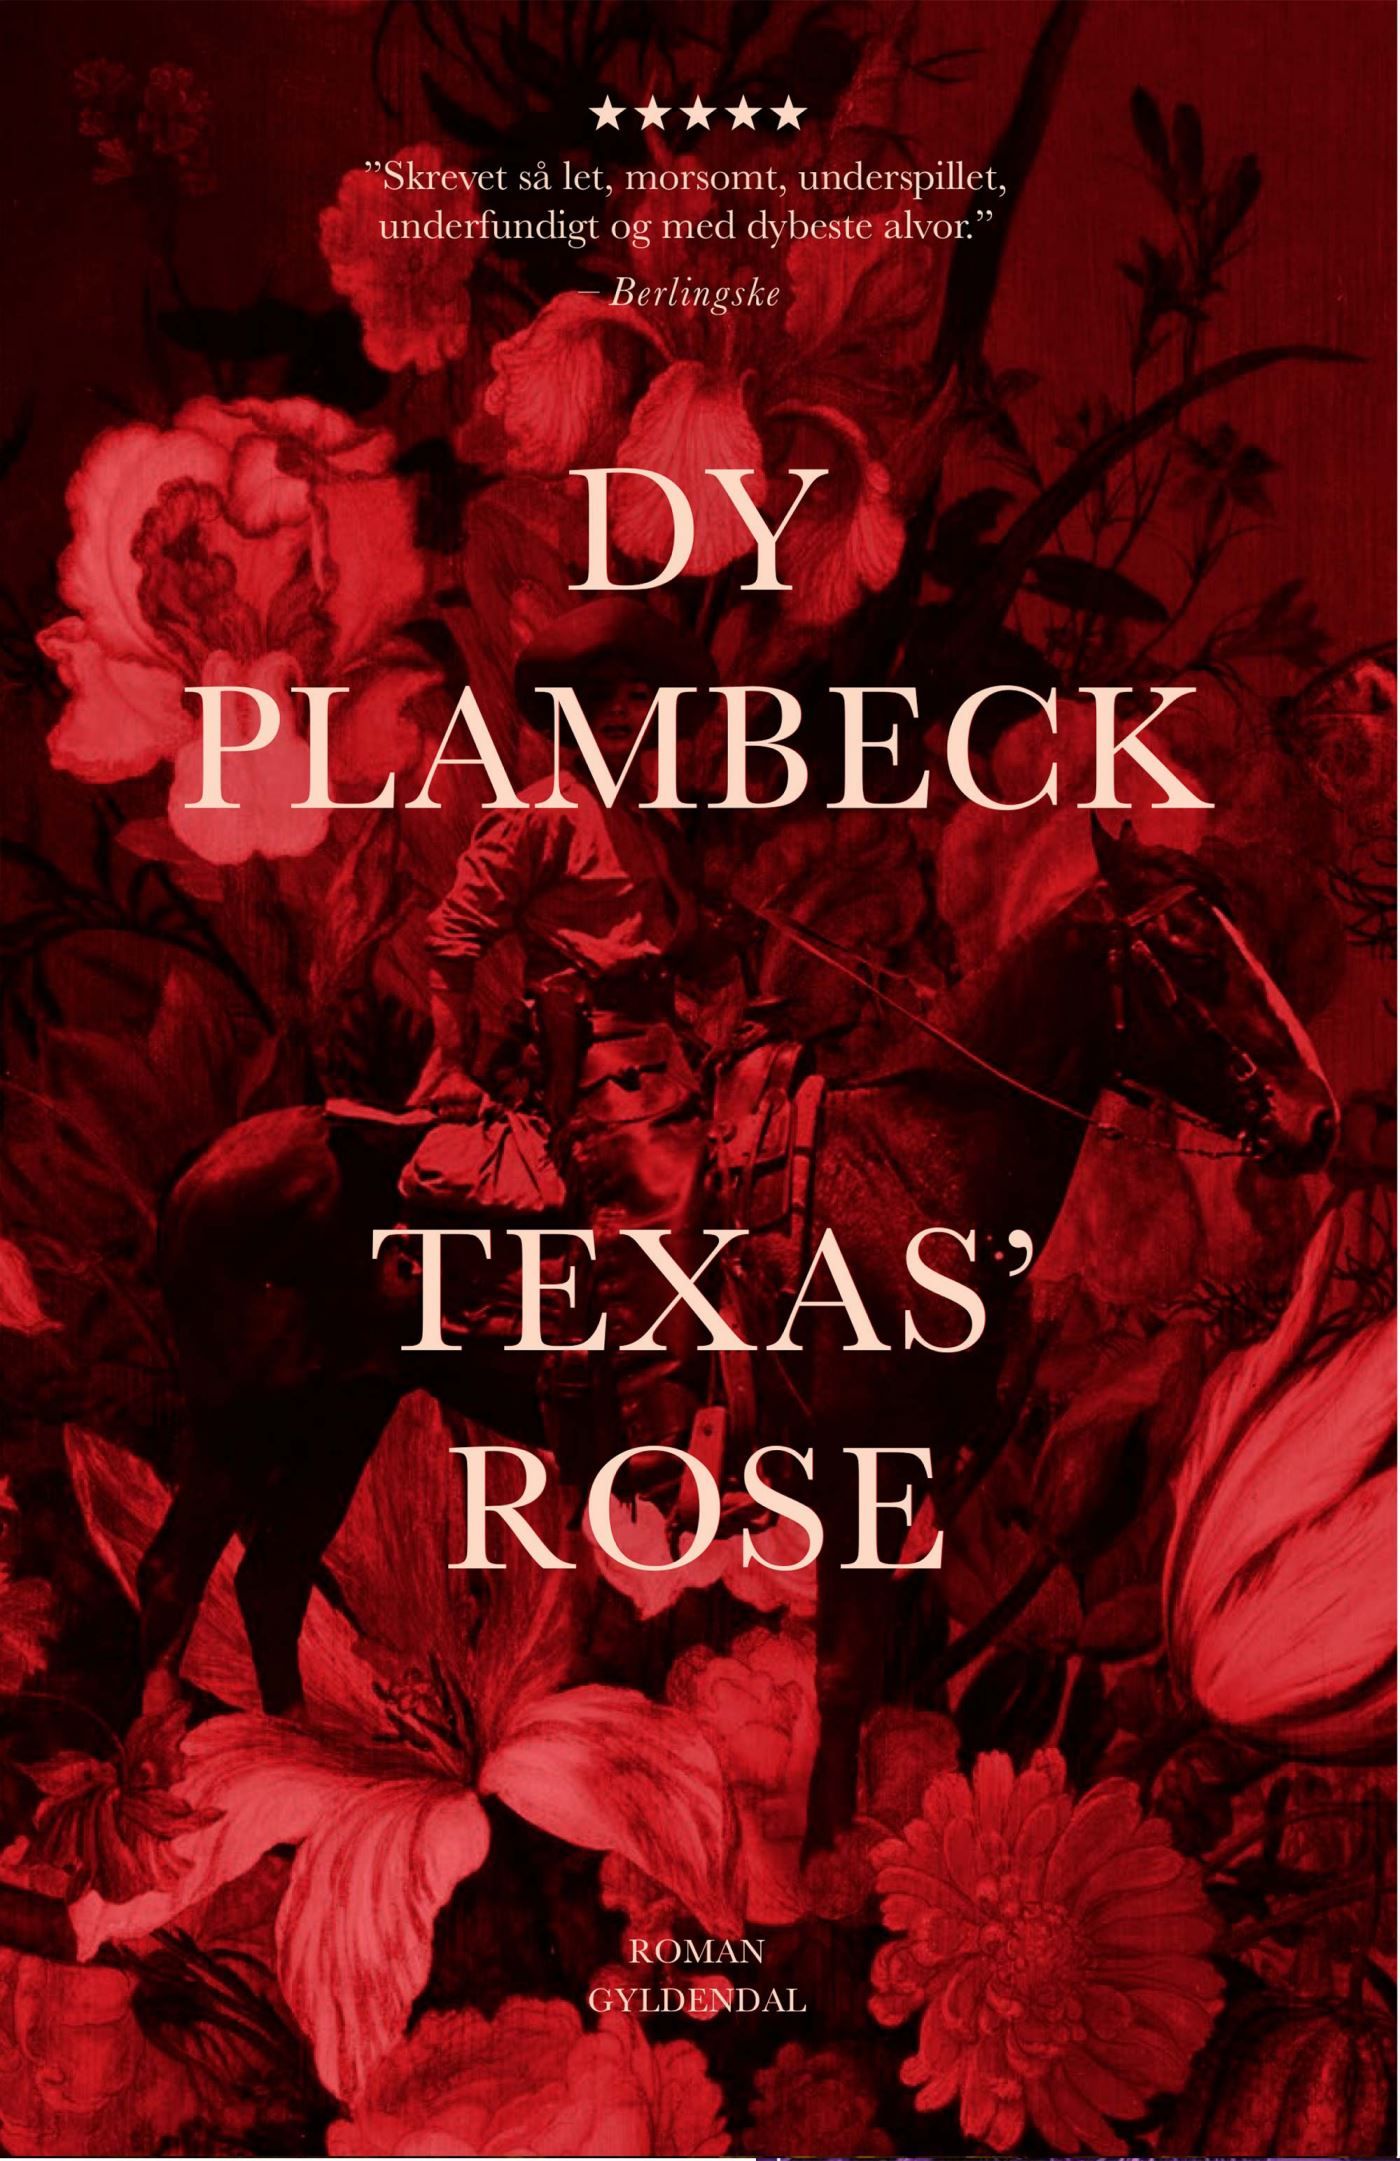 Texas' rose, audiobook by Dy Plambeck